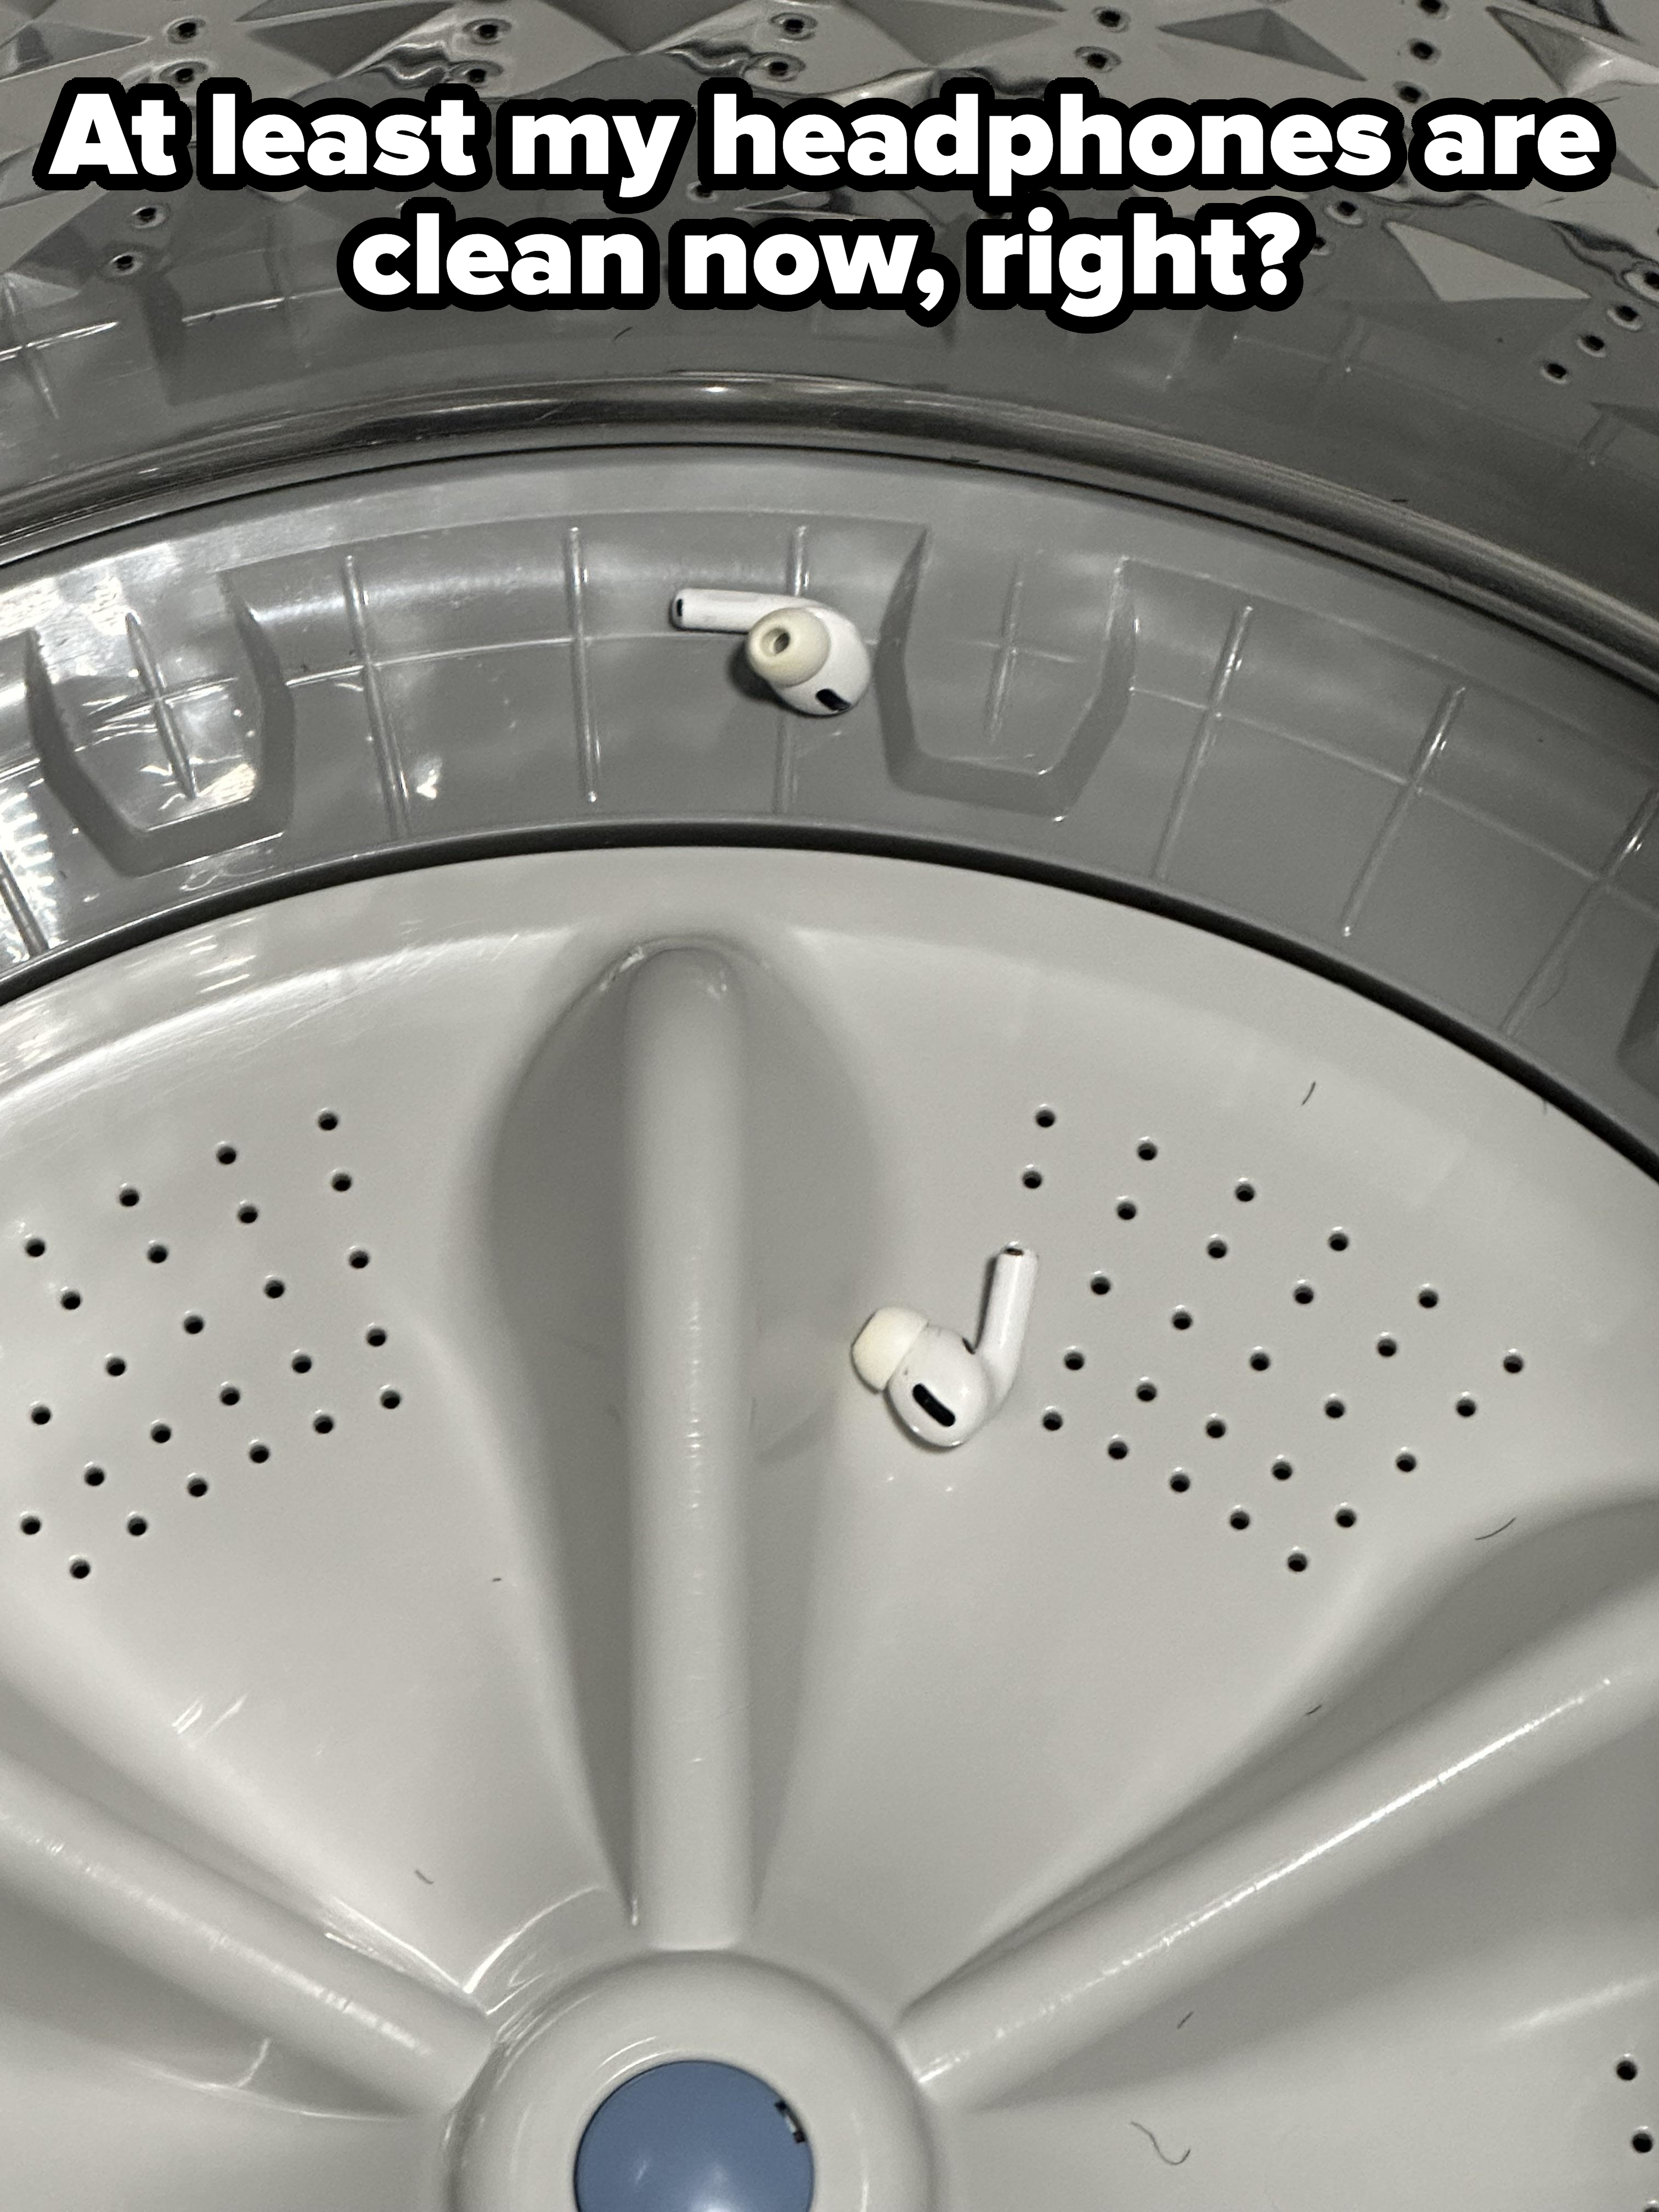 An AirPod rests inside a washing machine, next to the drum&#x27;s rib - a common laundry mishap